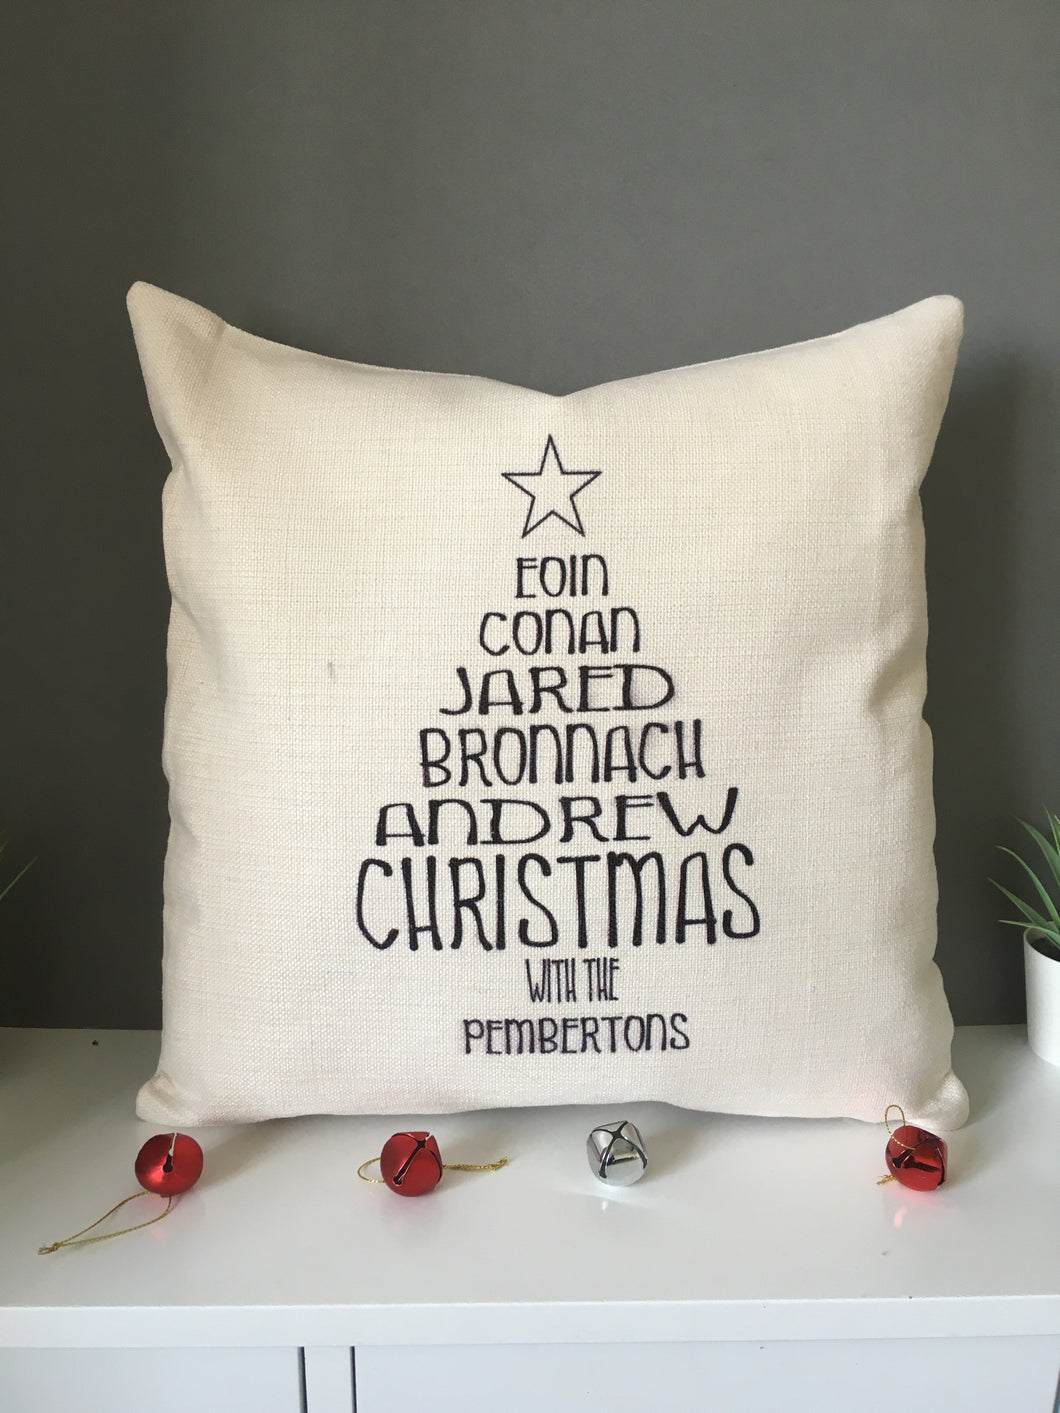 Christmas Tree Family Names cushion pillow - personalised - Fred And Bo